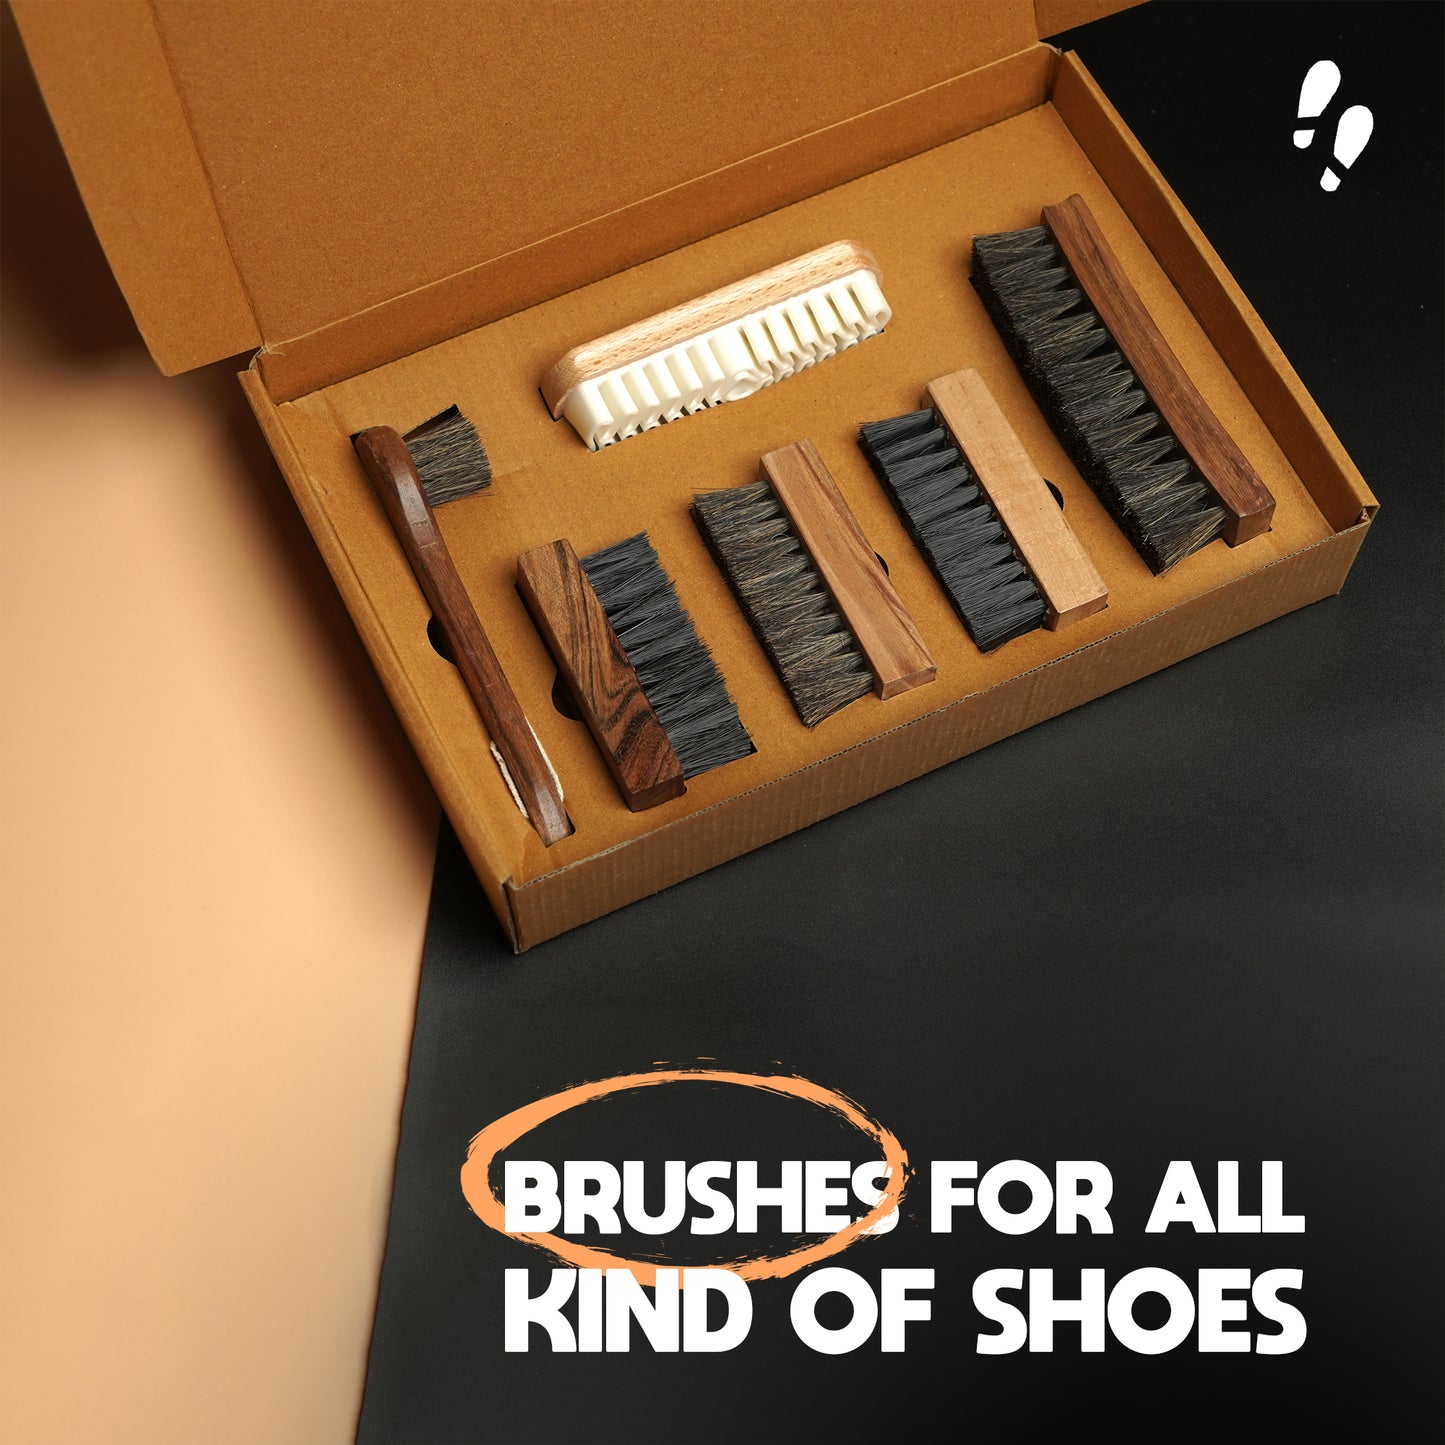 Shoe Mistri Shoes Brushes Combo Kit Pack of 6 for Cleaning, Shining & Buffing Boots Polish & Other Leather Care